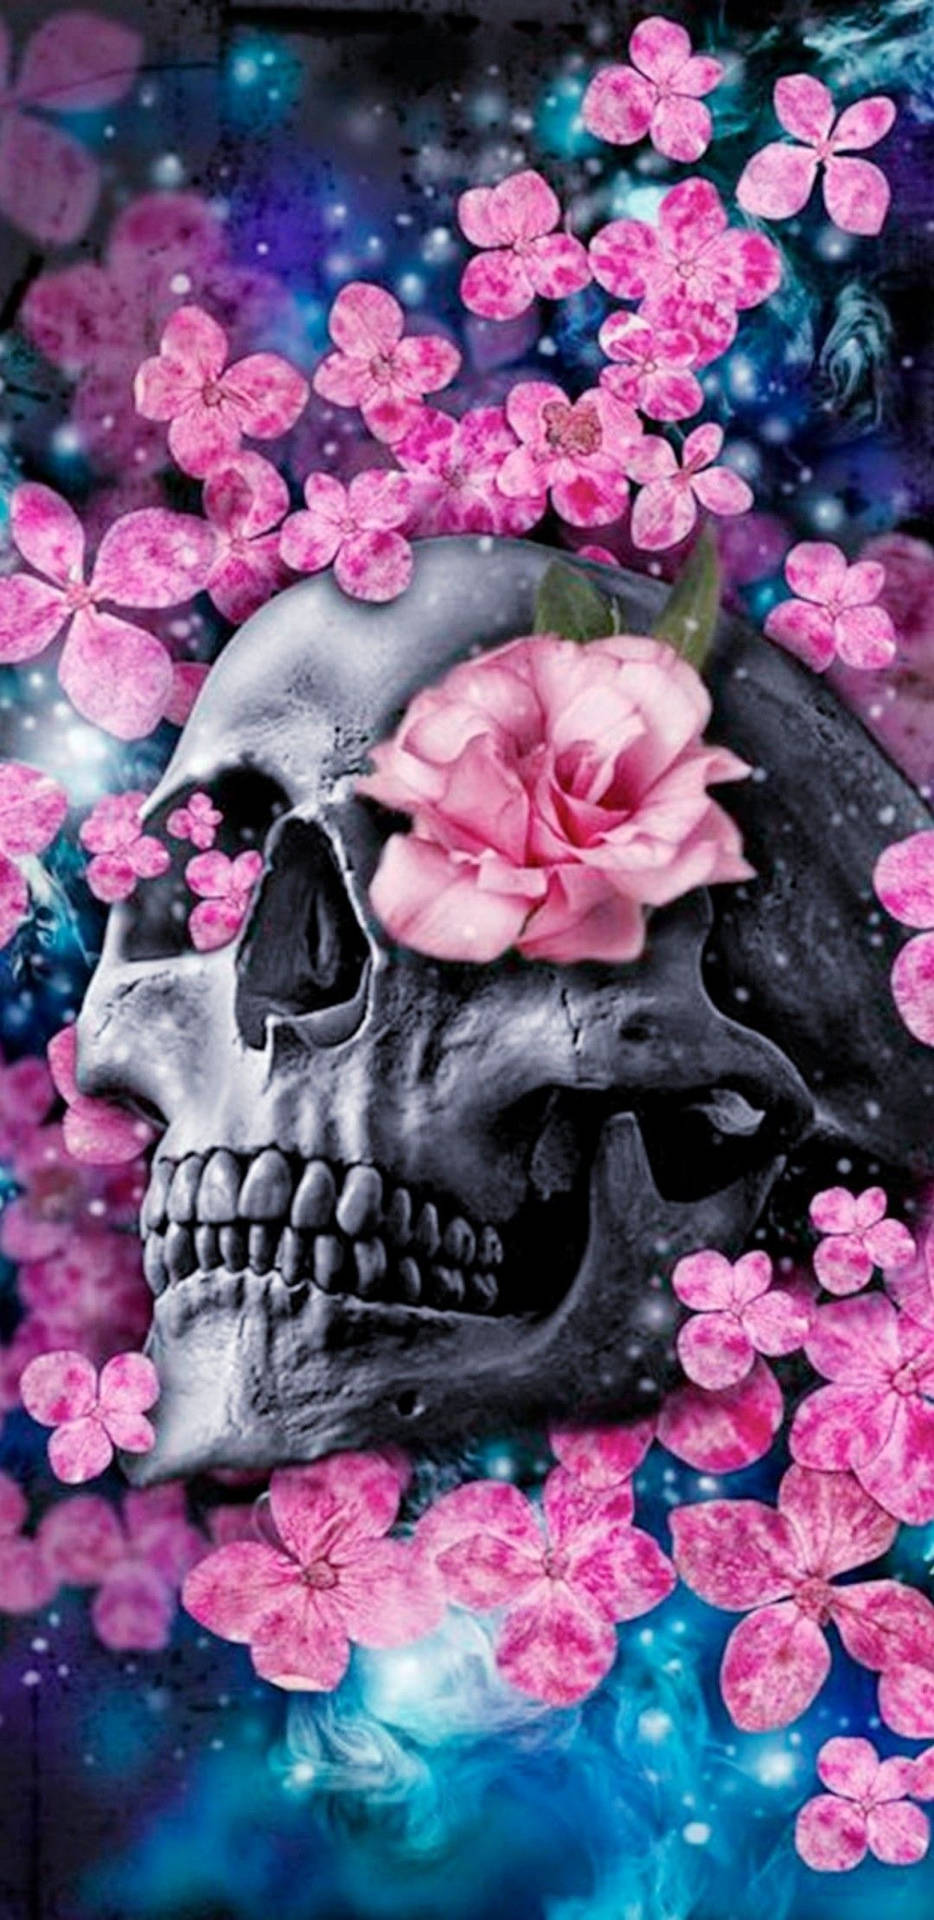 Cute Skeleton And Flowers Aesthetic Photo Wallpaper